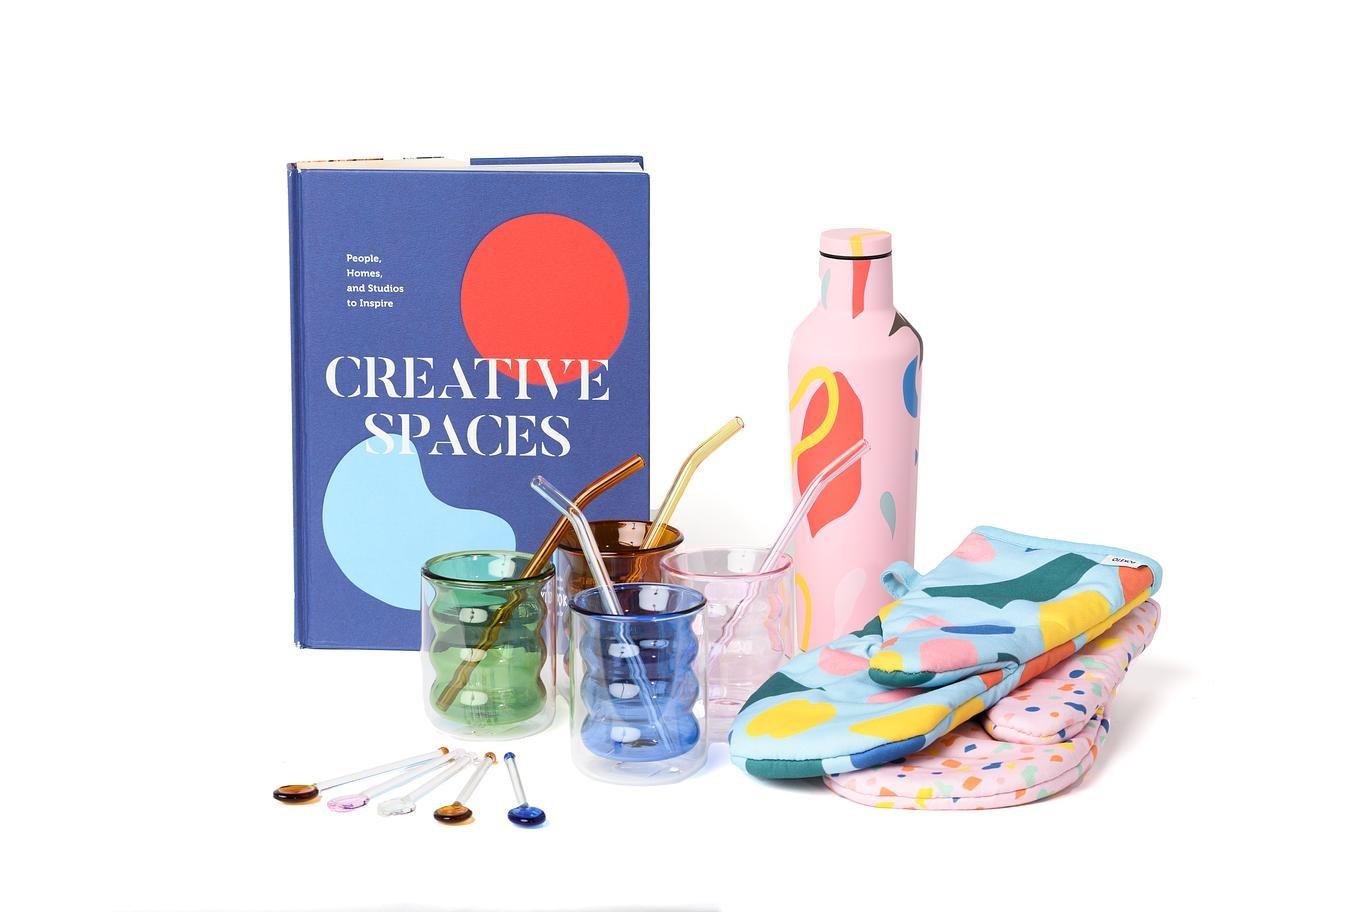 MCA Store merch including the book 'Creative Spaces', colorful glassware and other kitchen items